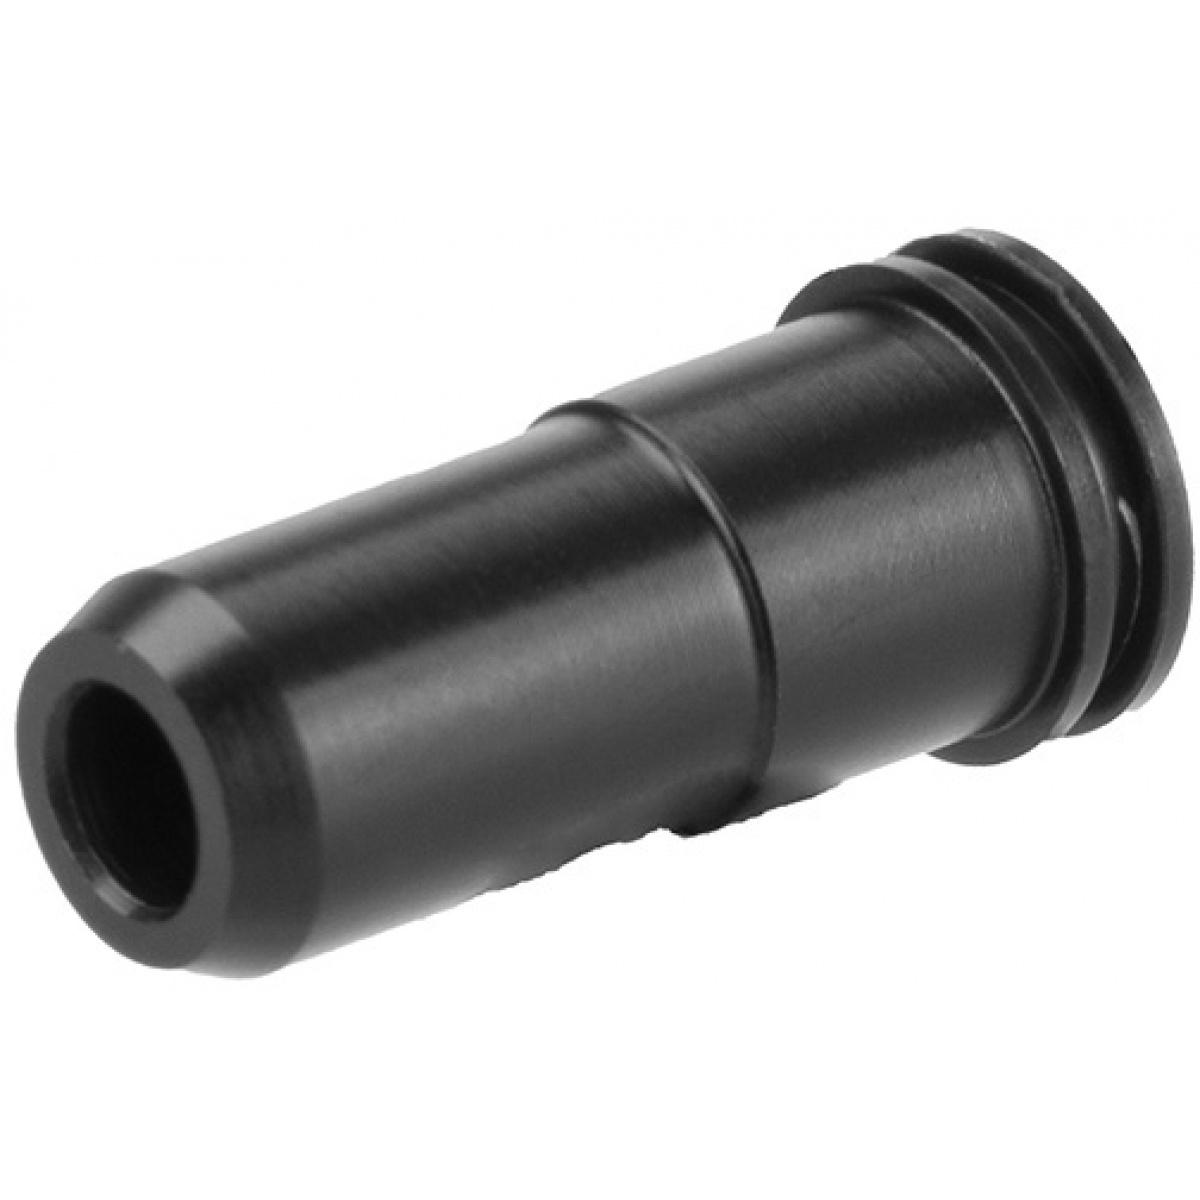 AIRSOFT AIR SEAL NOZZLE AK SERIES LONEX HIGH QUALITY UK DELIVERY 